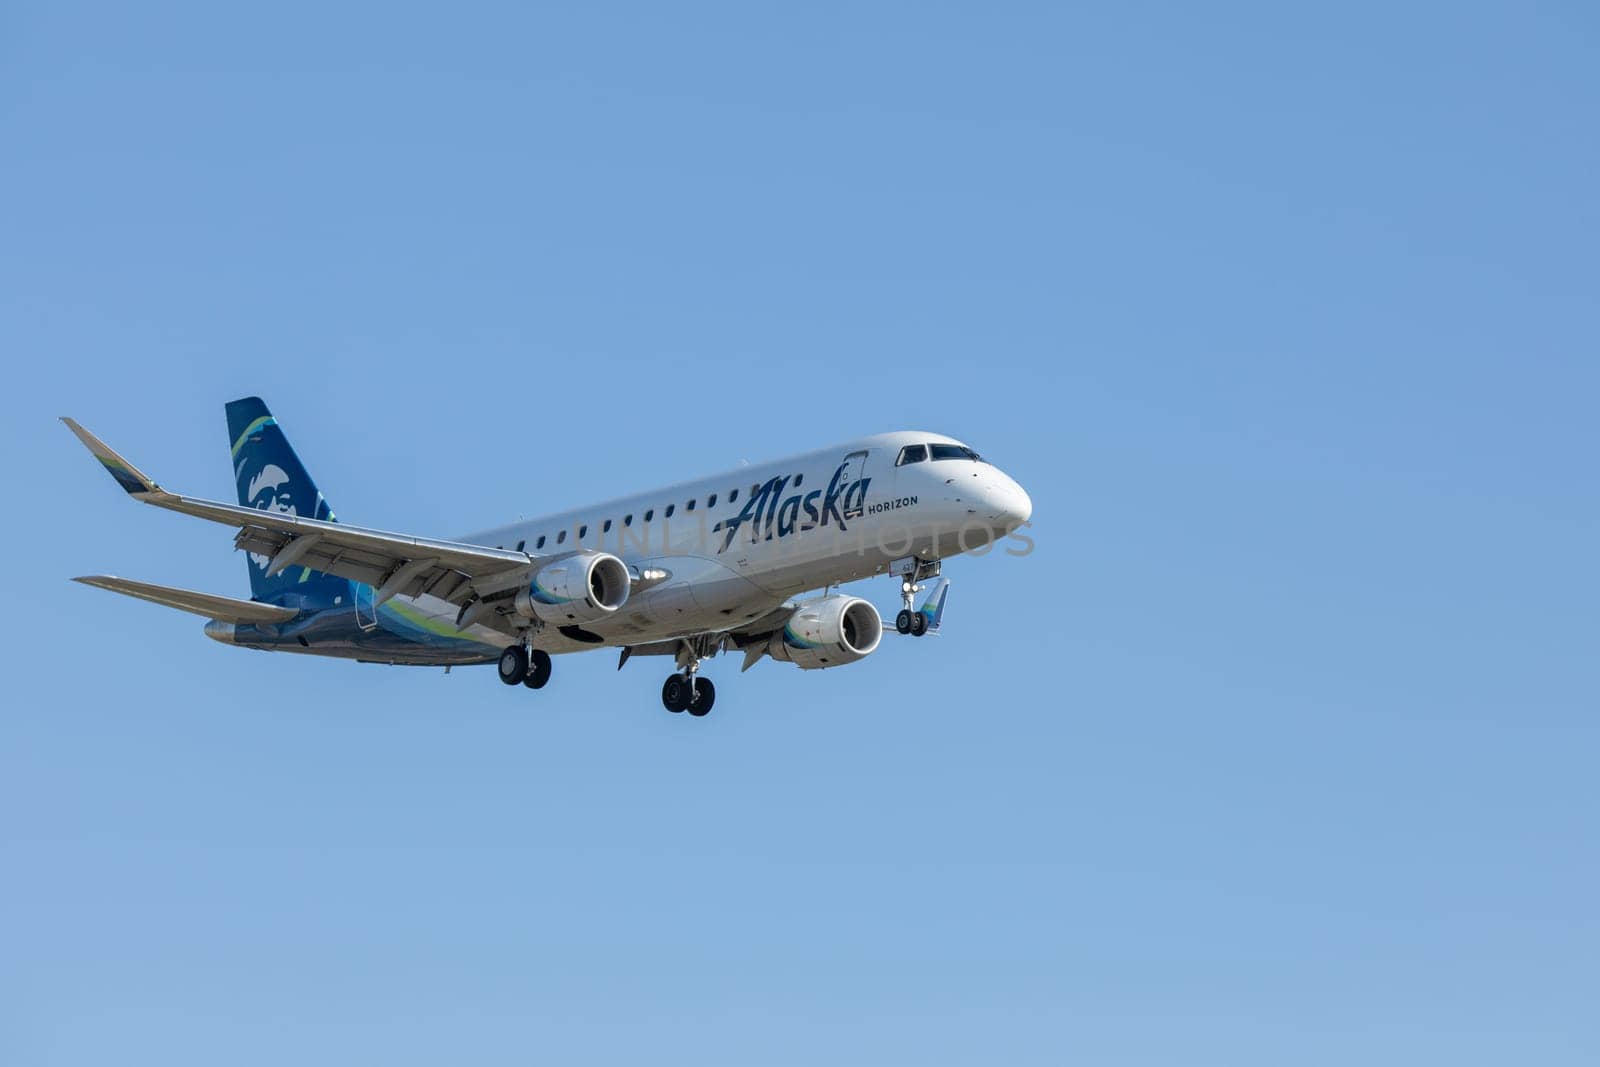 Alaska airlines landing at boise airport by txking